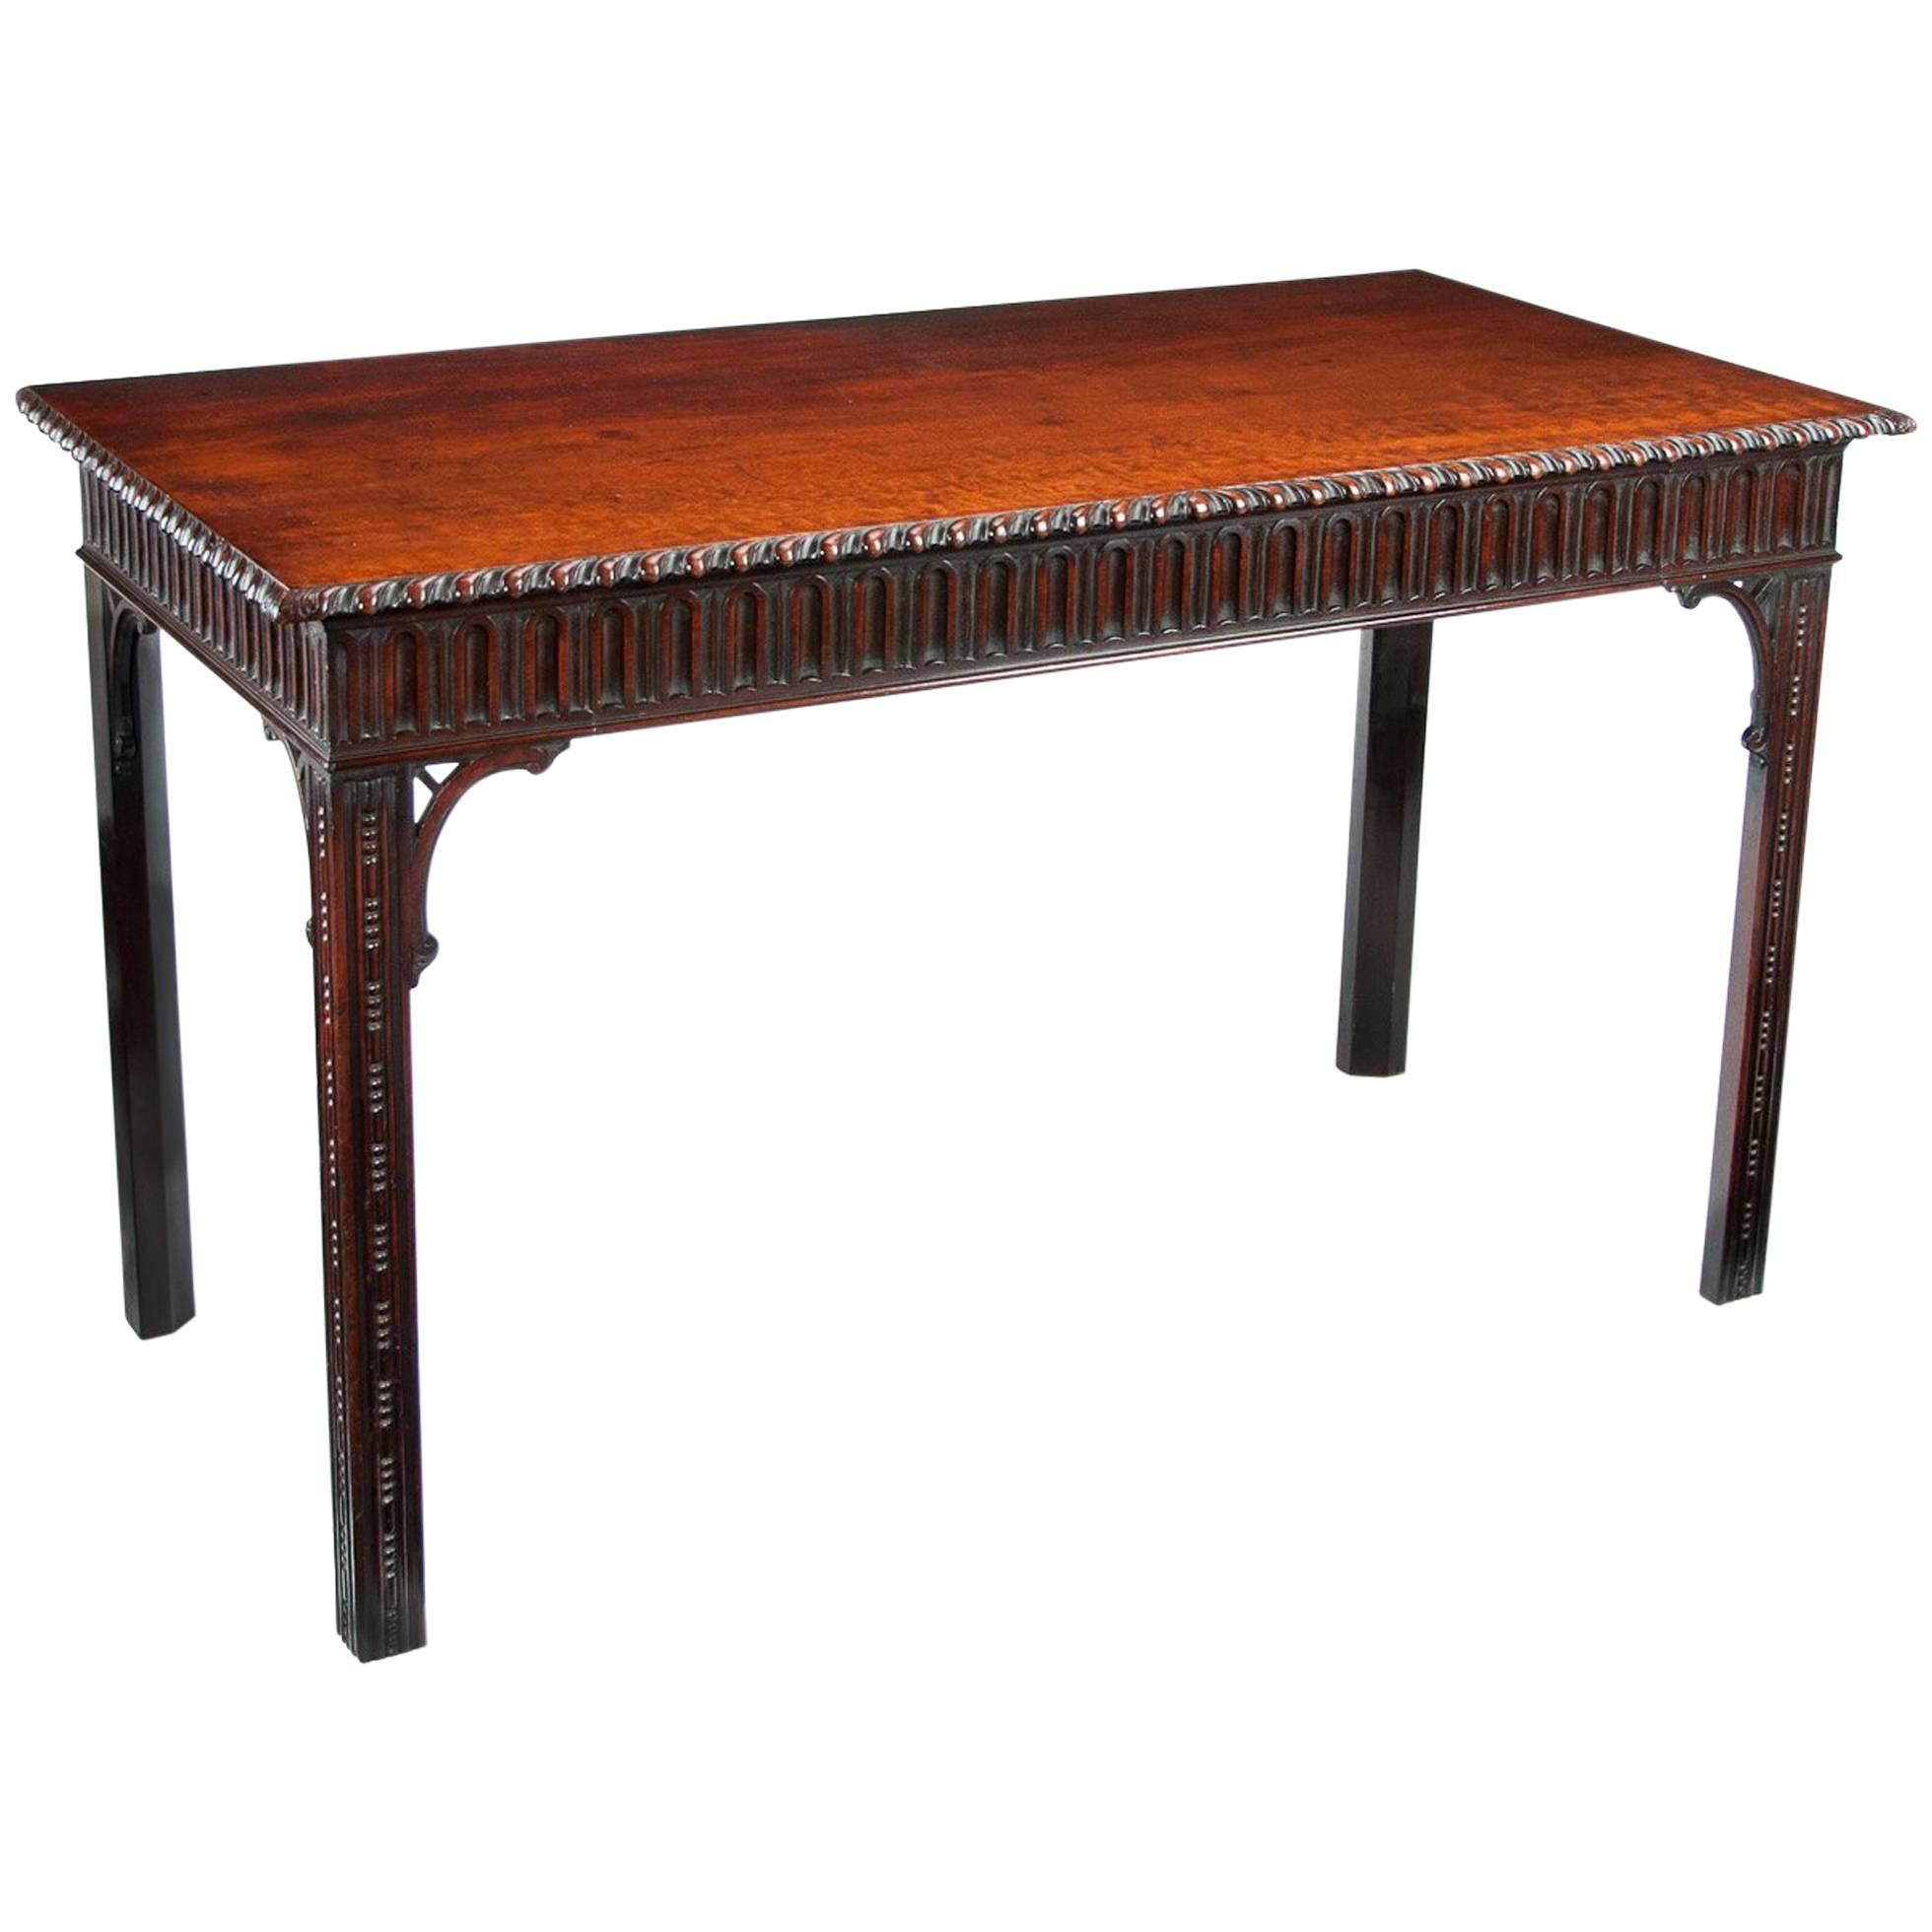 Early 19th Century Georgian Mahogany Console, Serving Table, W.Williamson & Son